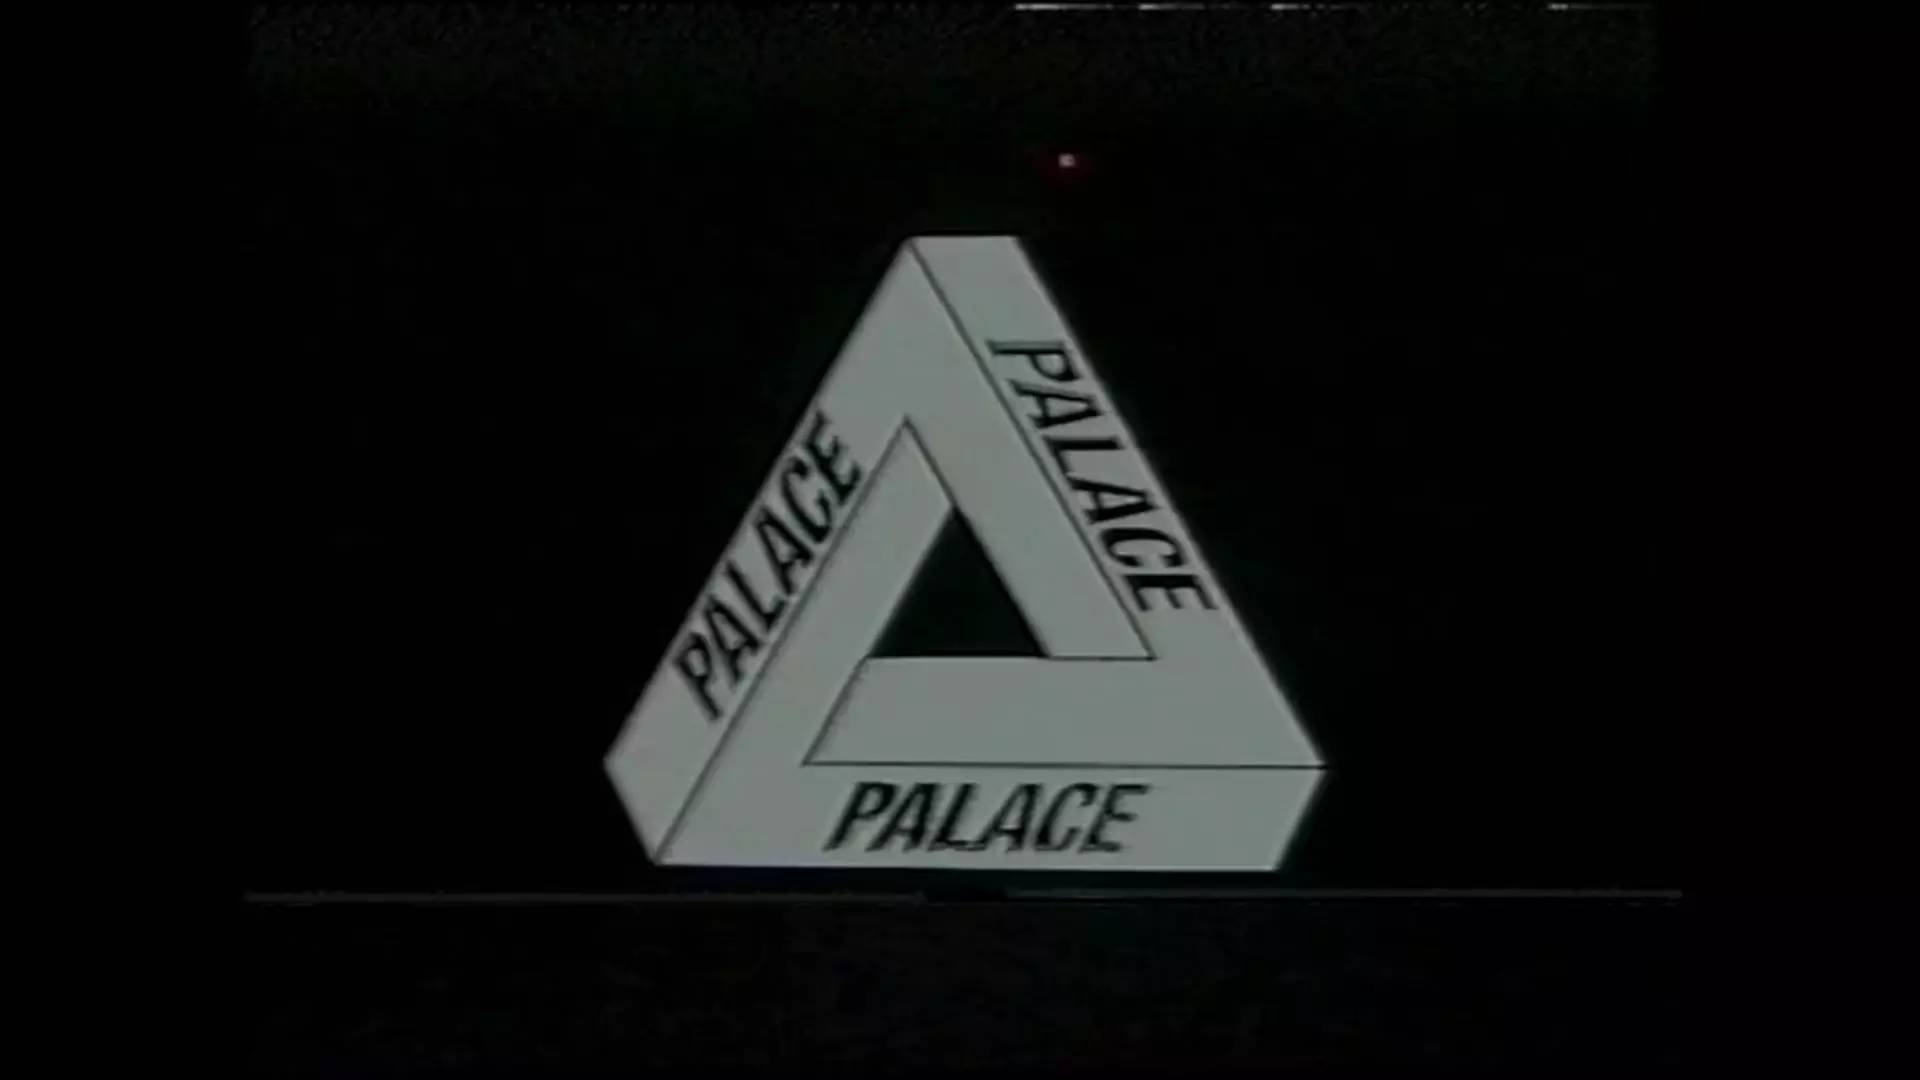 palace skateboards, the merchandise